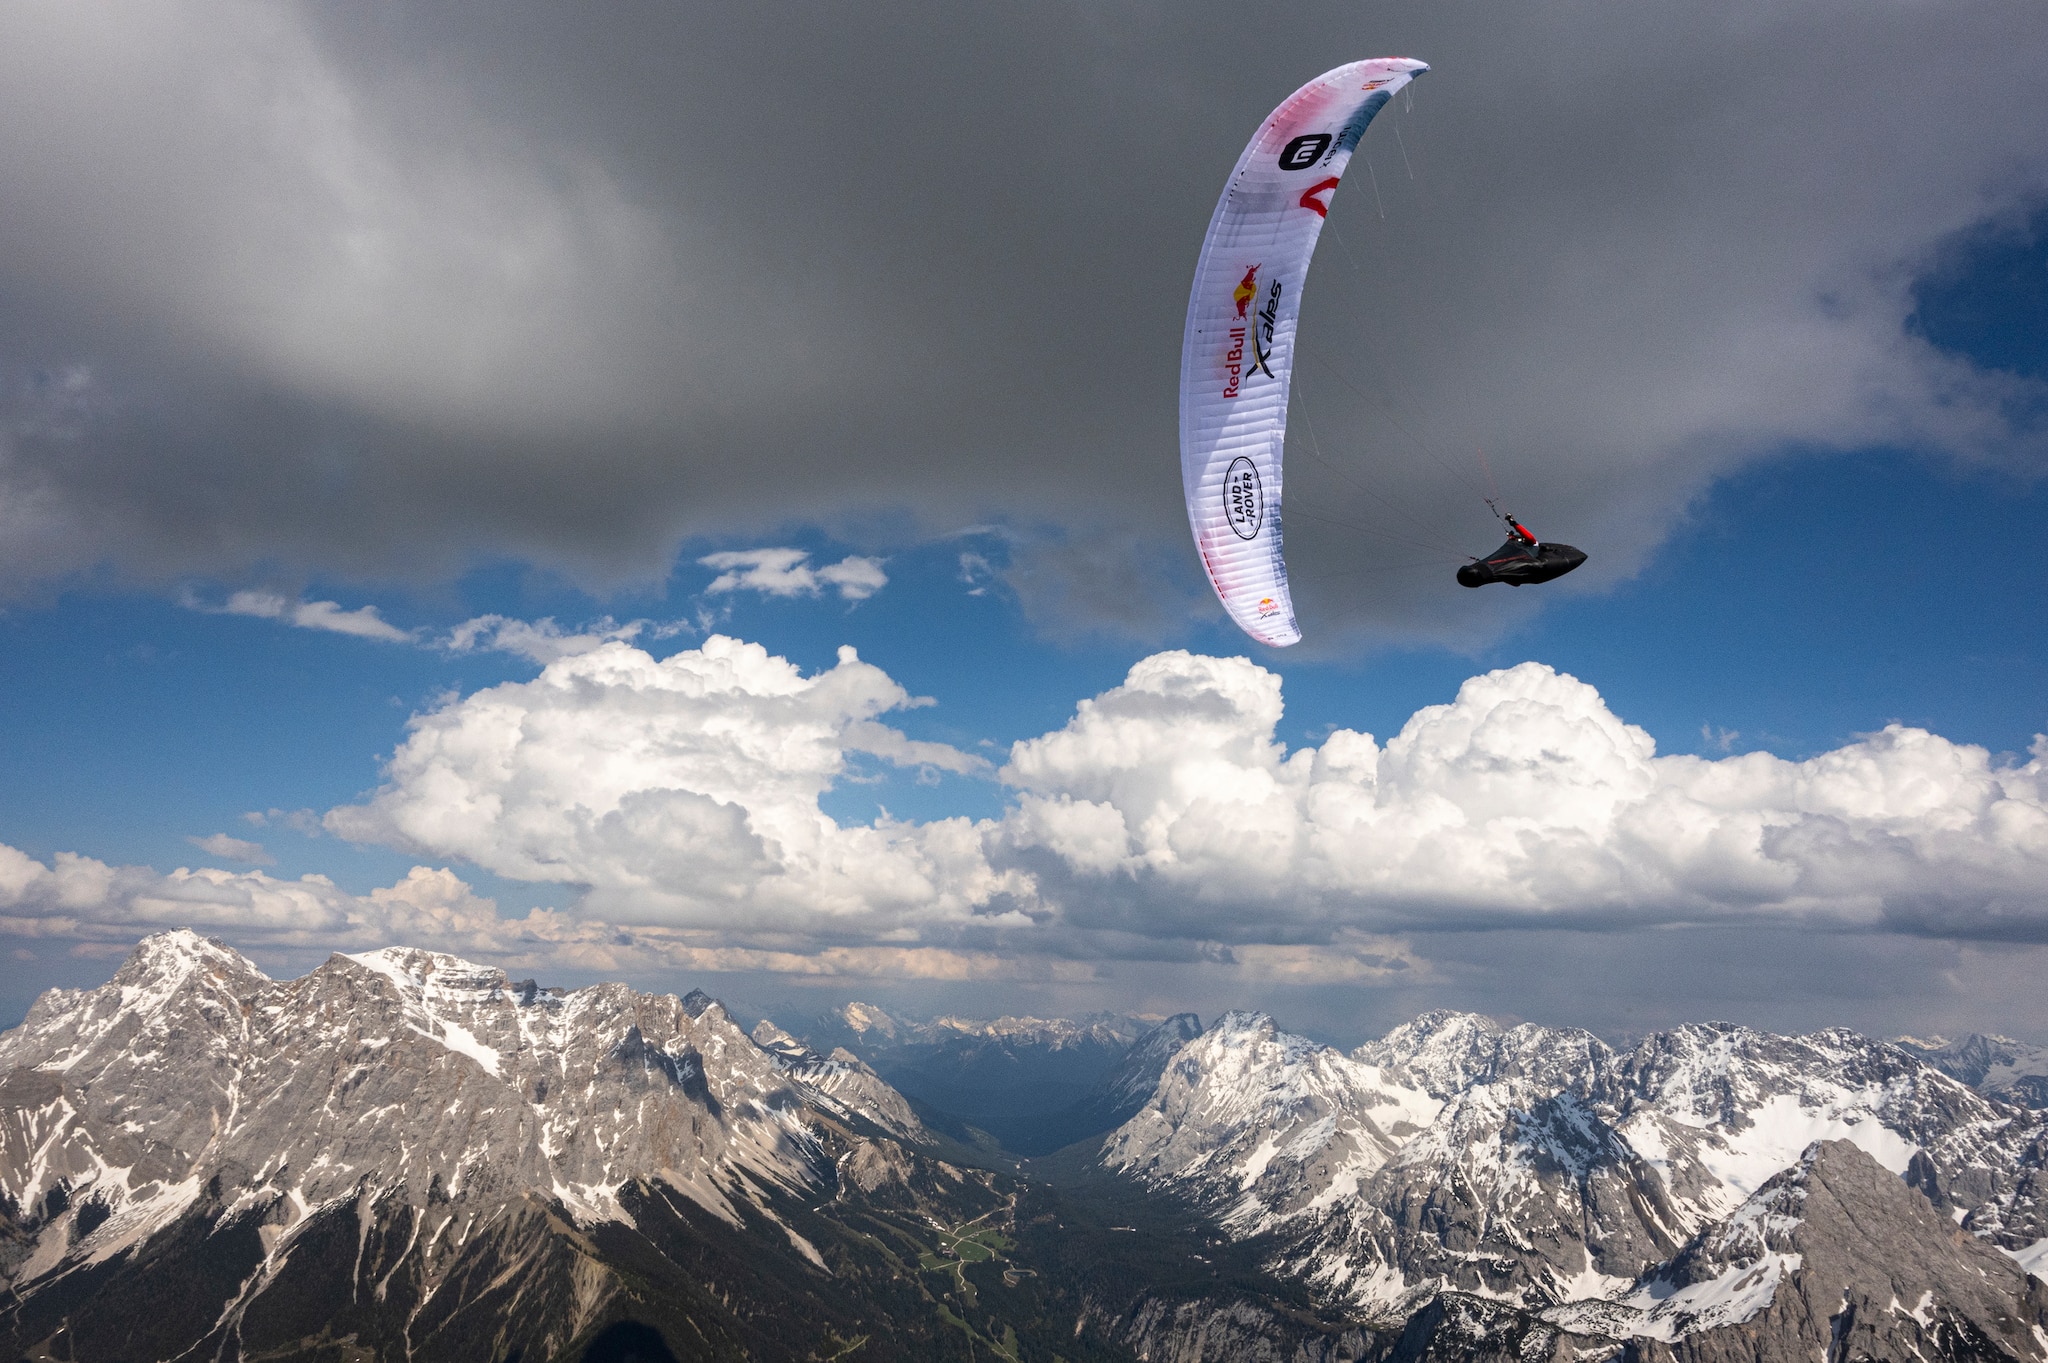 Participant flies during the Red Bull X-Alps preparations in Lermoos, Austria on June 02, 2021